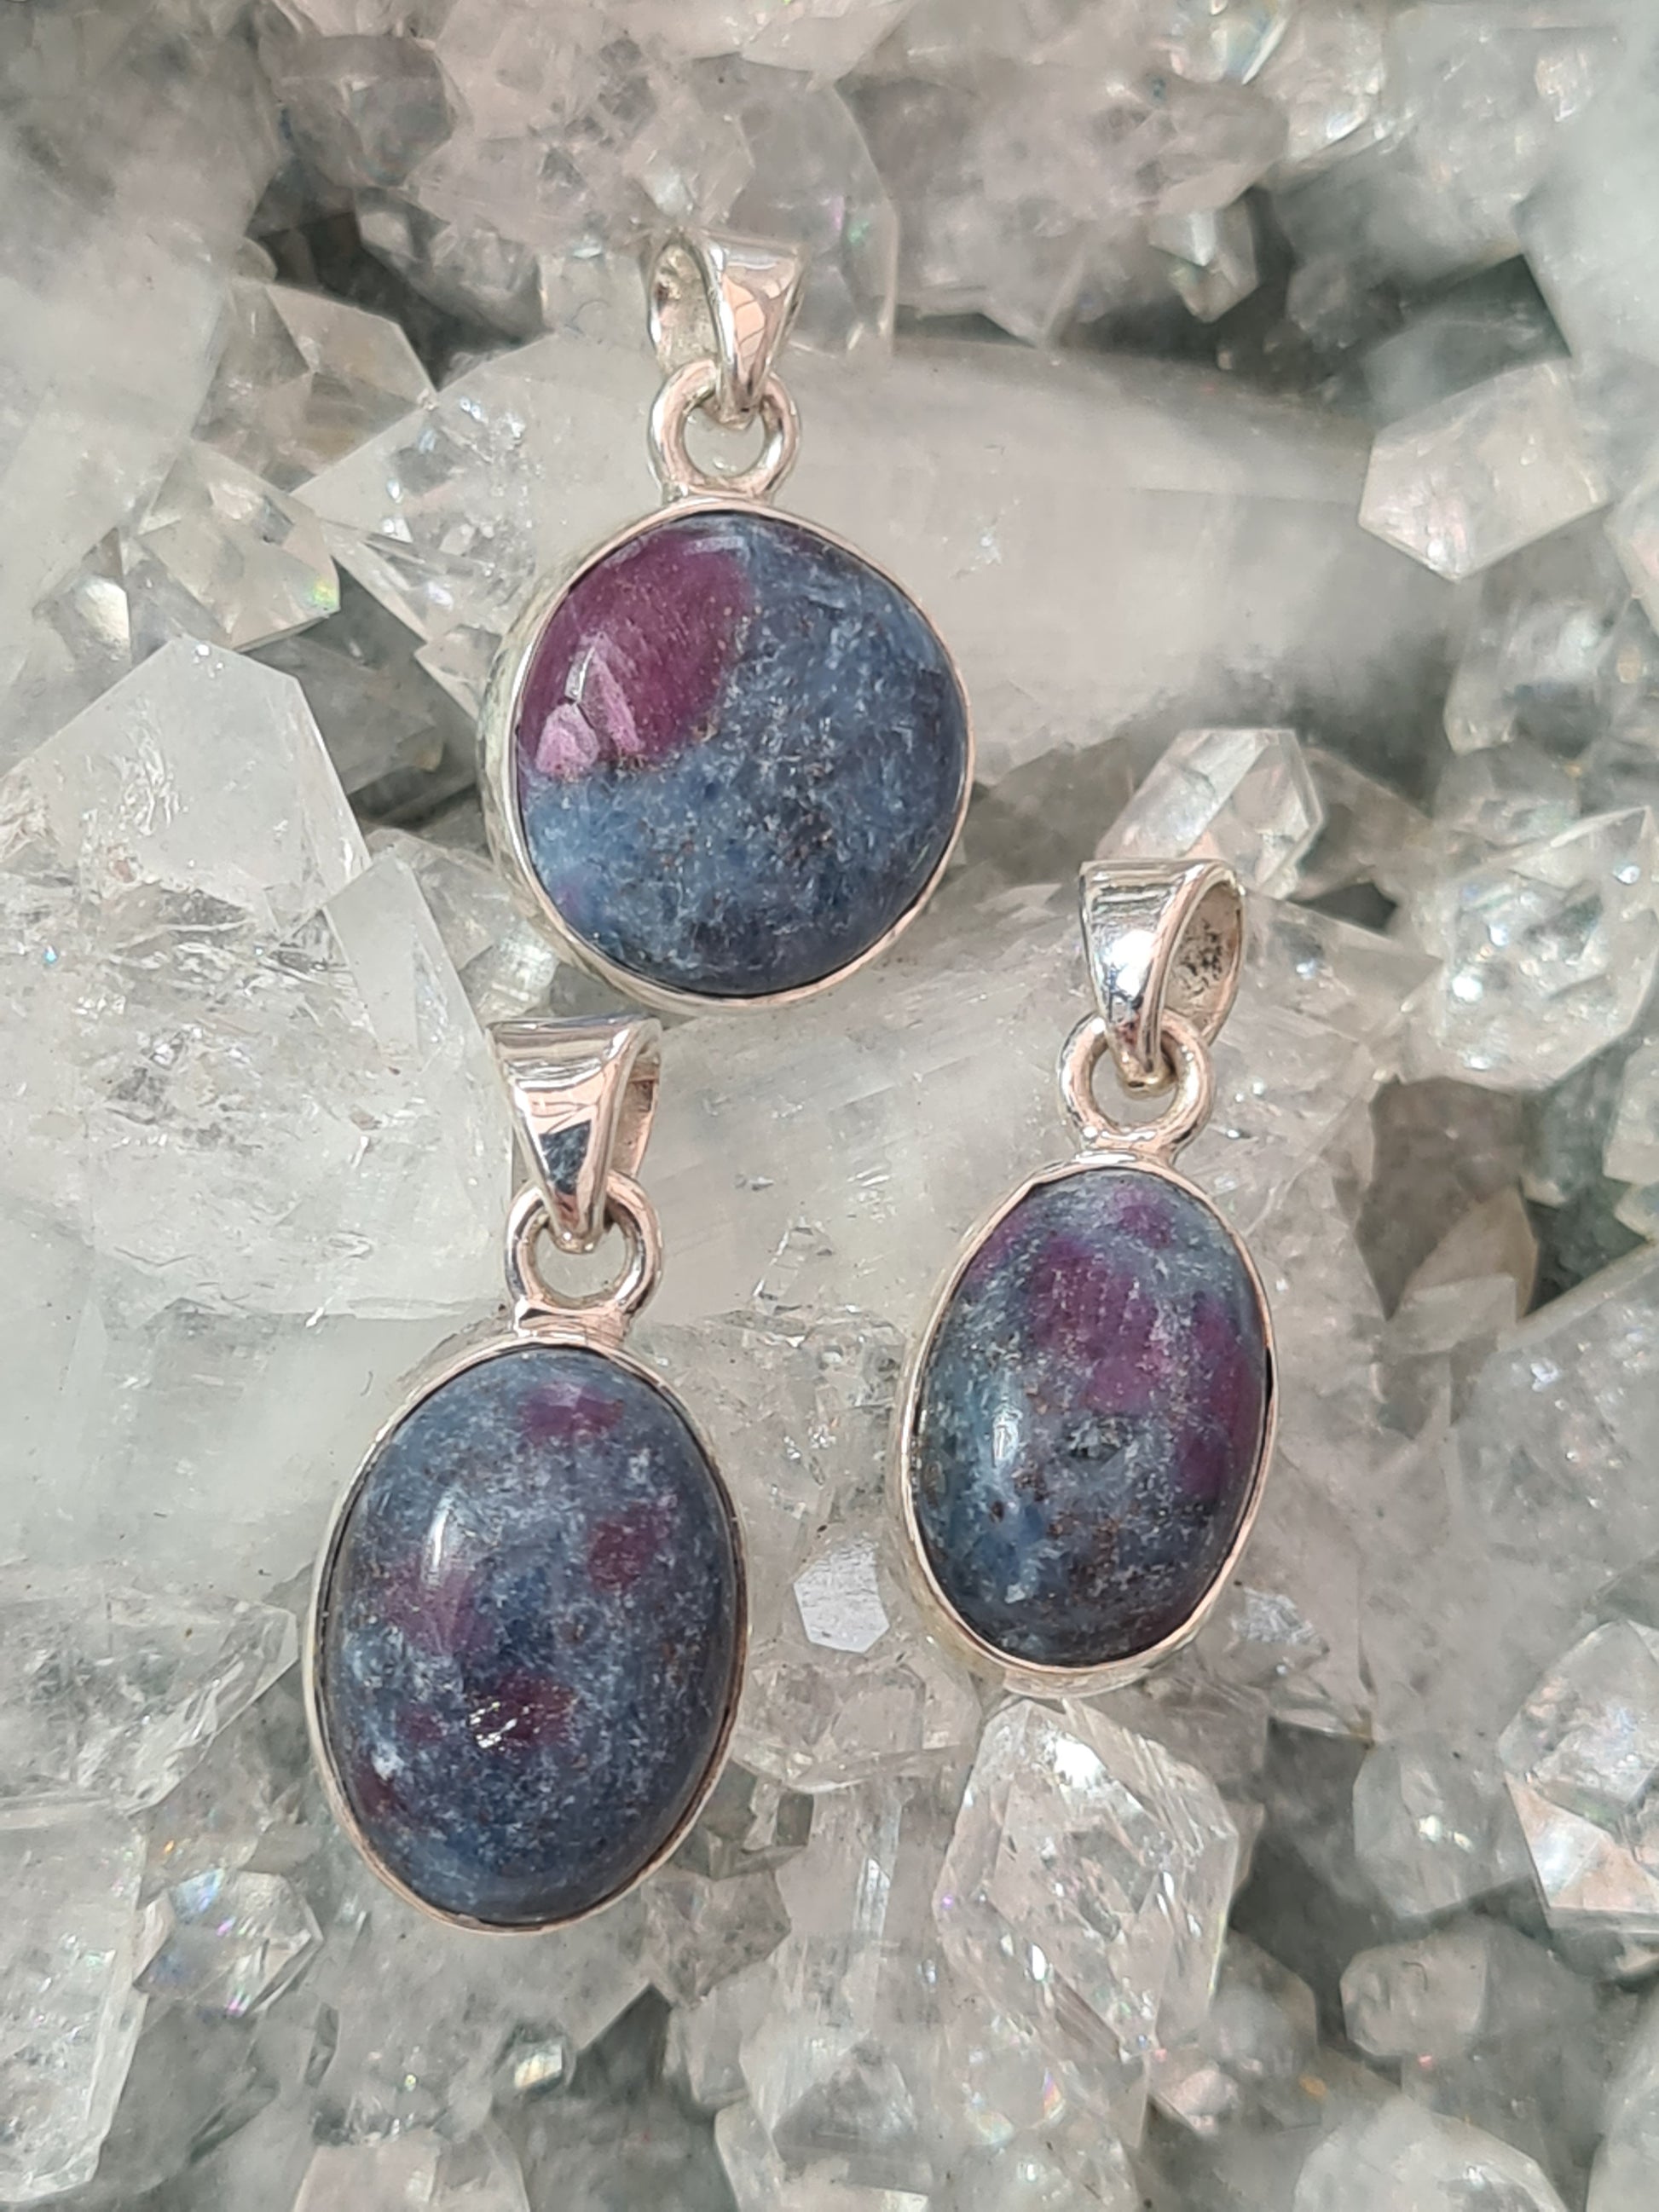 Three Natural Ruby in Blue Kyanite Pendants in Sterling Silver. Two oval shaped and one round shape.
Photographed on an apophyllite cluster background. 